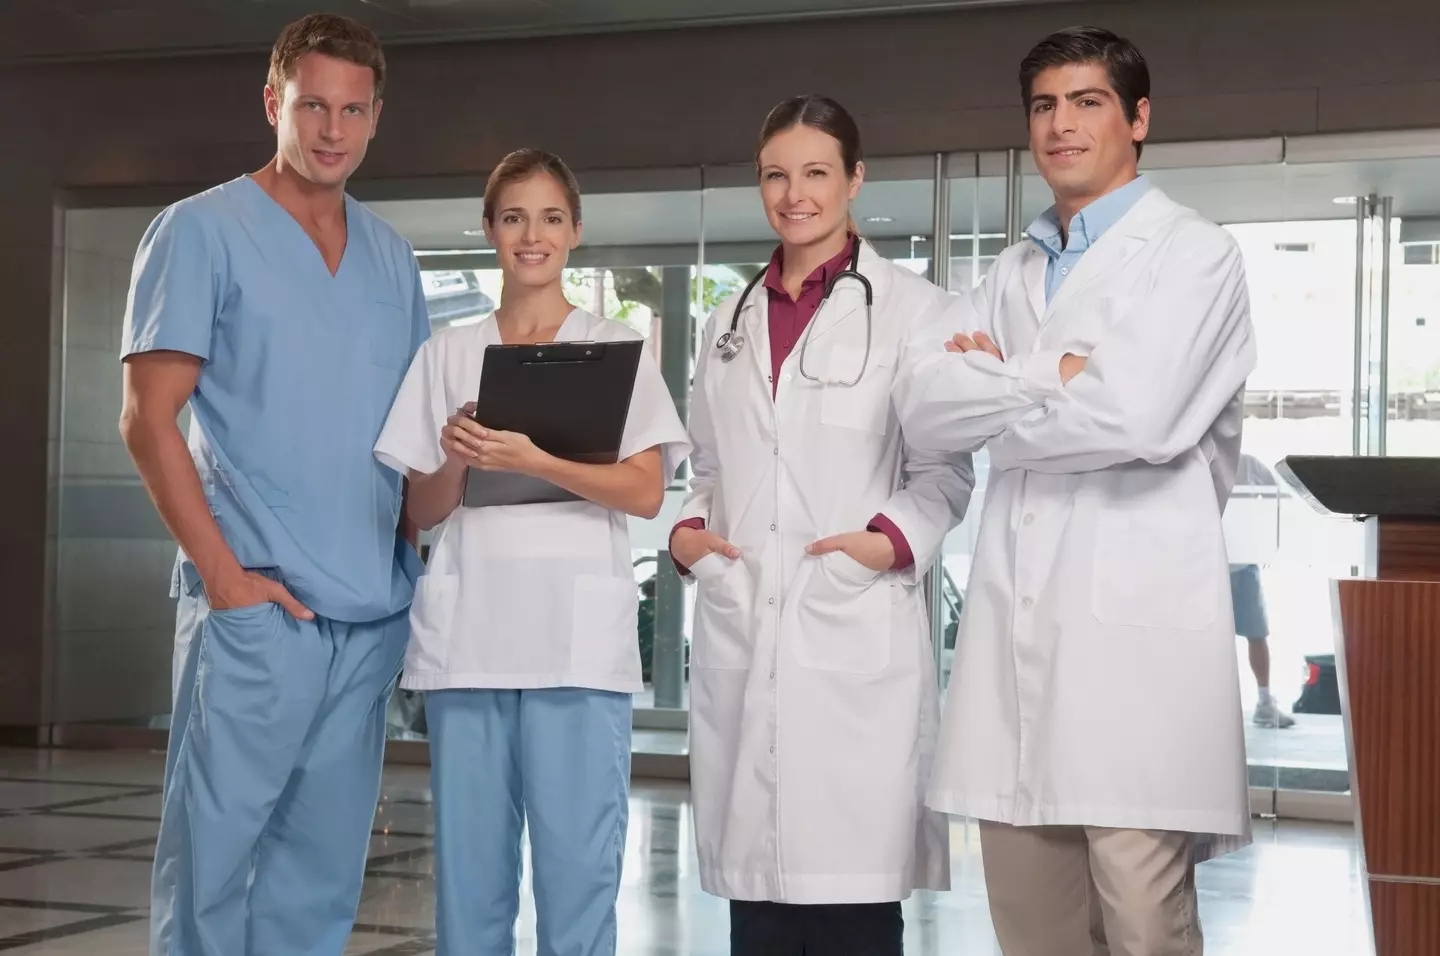 A team of actual doctors, and not this team of attractive stock photo models, were able to treat the woman after she nearly died during sex.